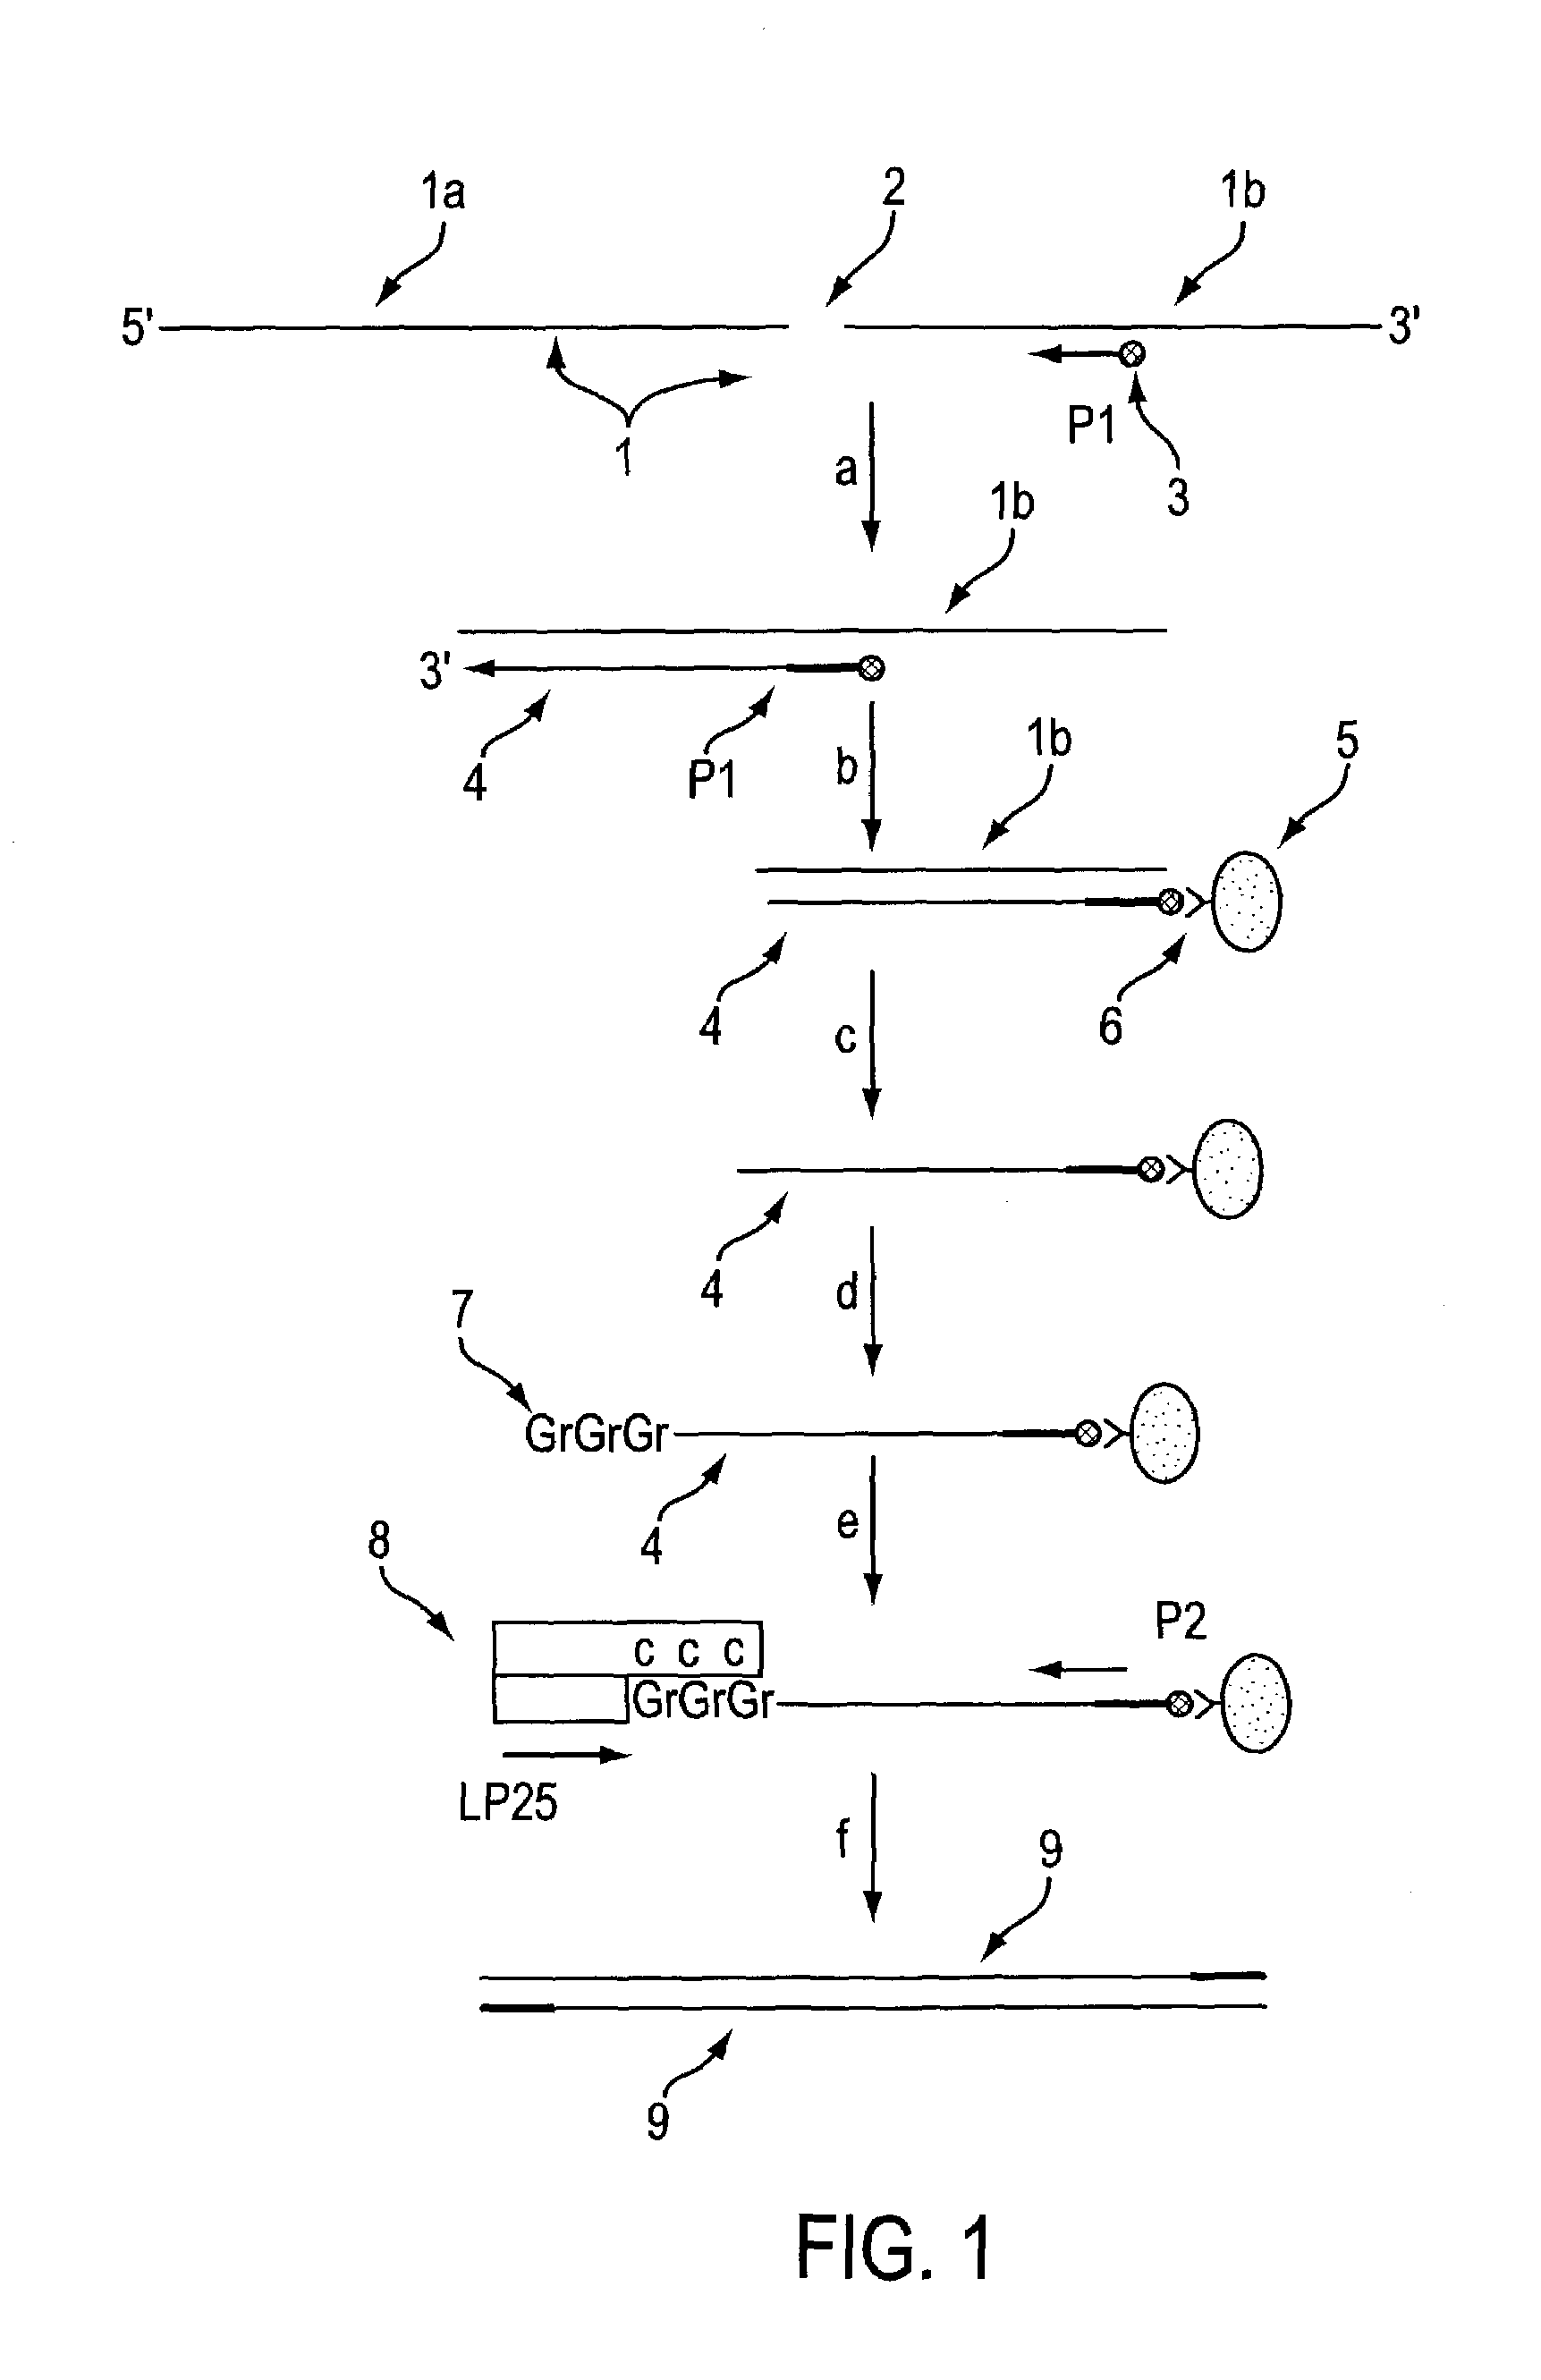 Method for identifying accessible binding sites on RNA